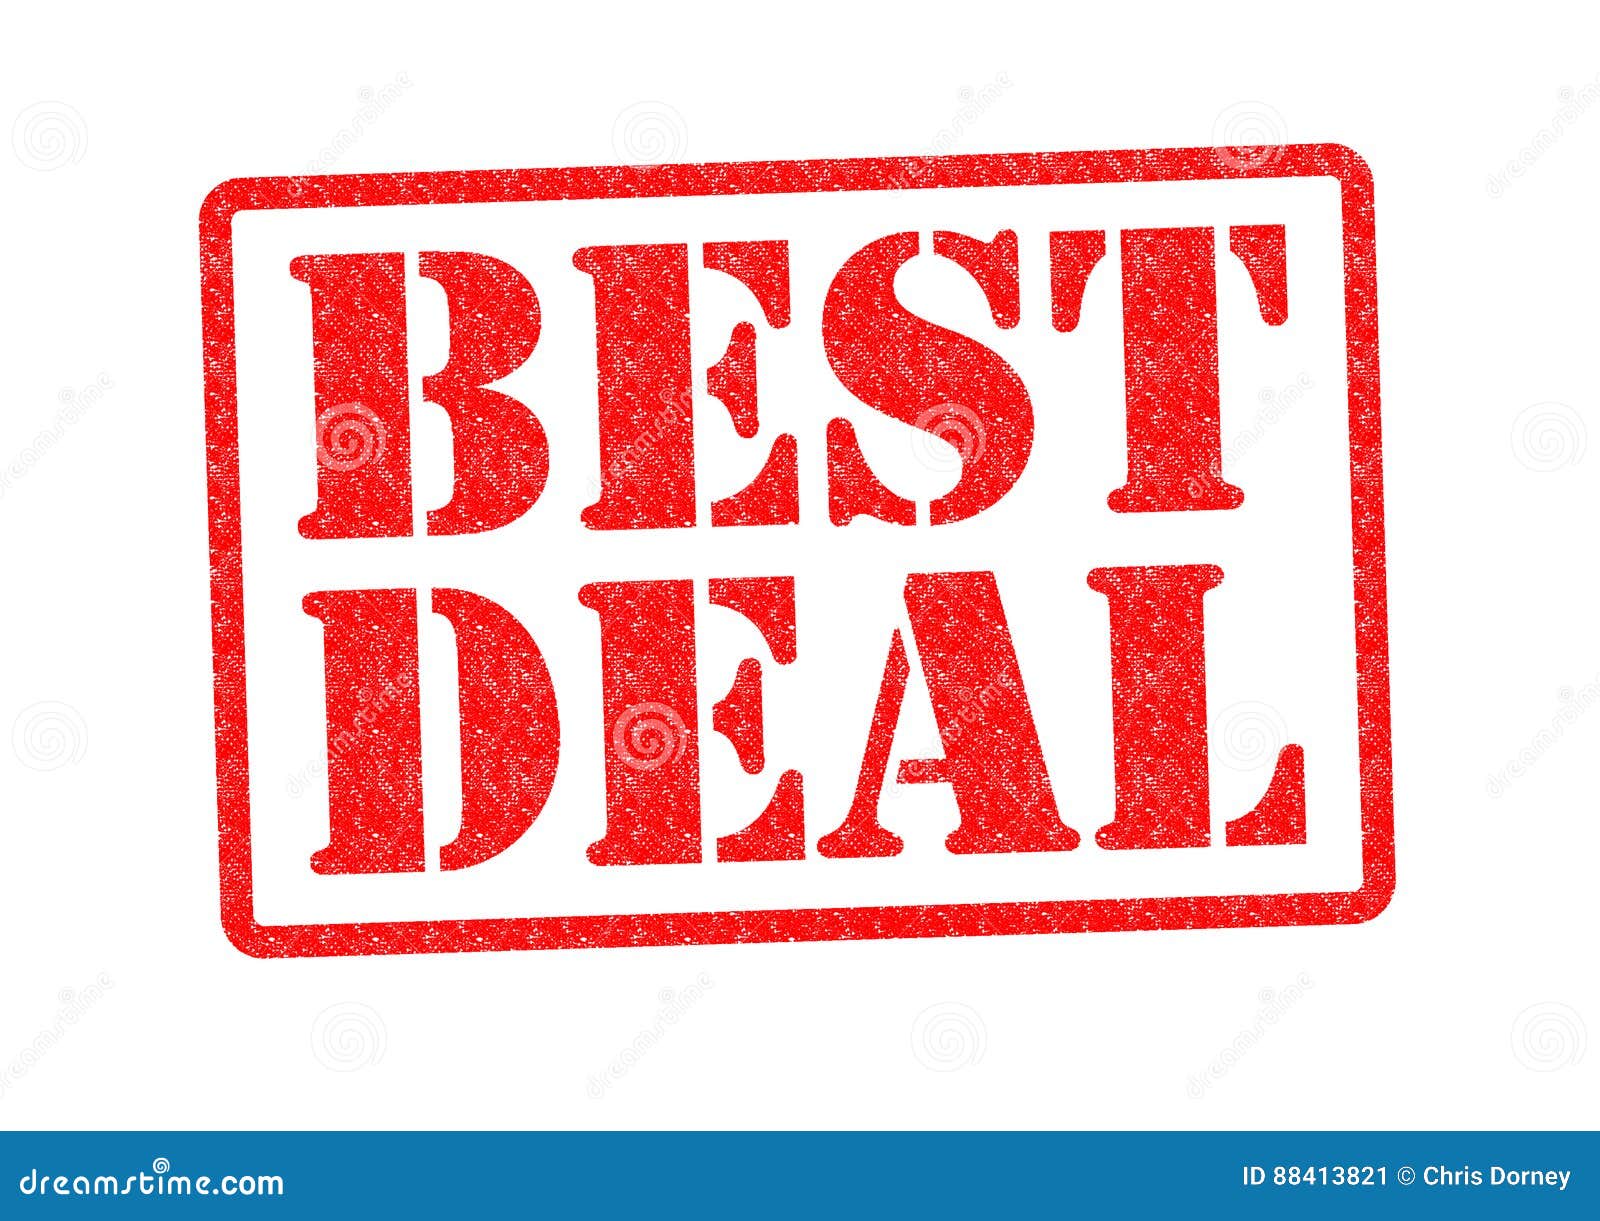 Great deals Stock Photos, Royalty Free Great deals Images